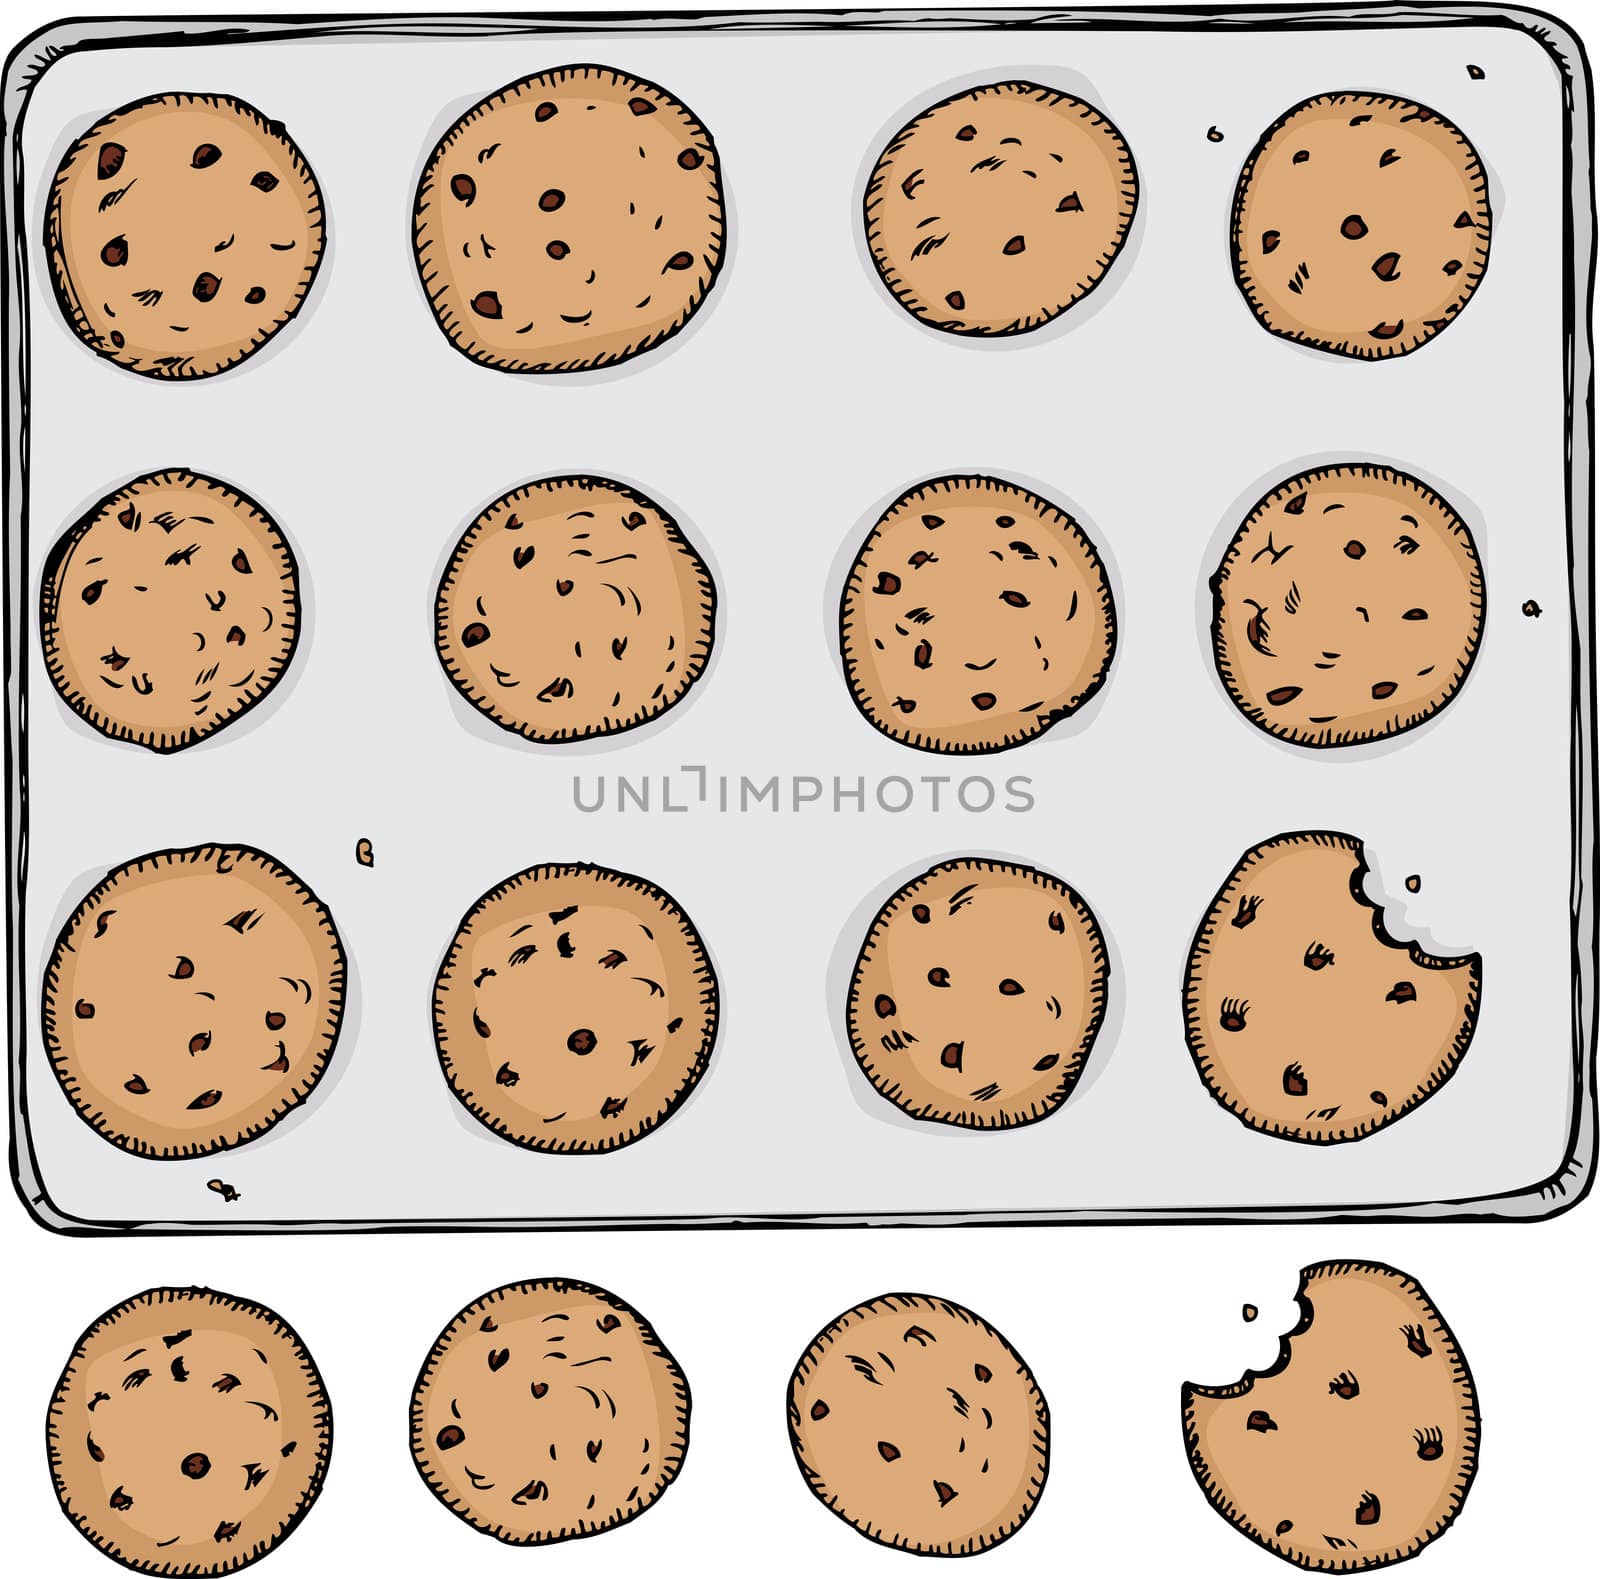 Tray of 12 chocolate chip cookies on metal tray with 4 off the tray